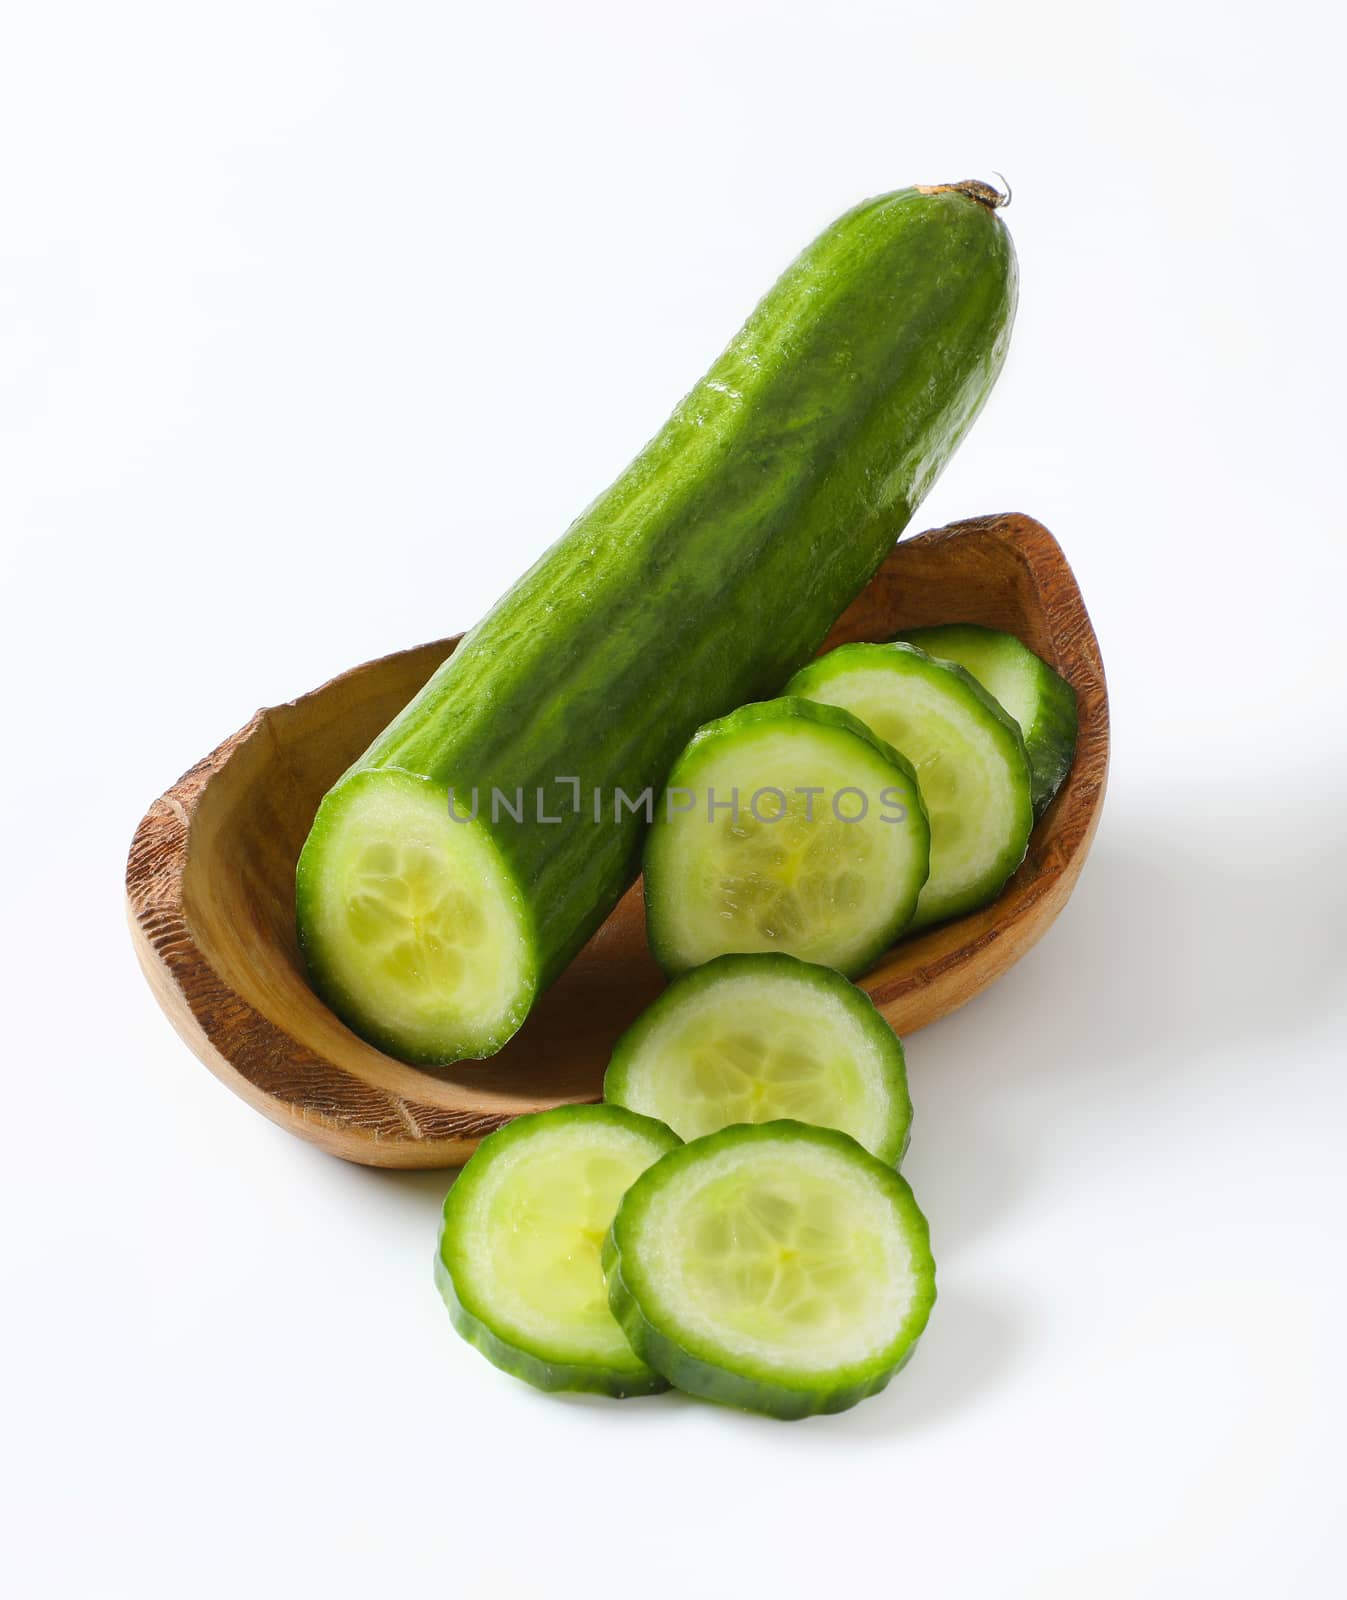 sliced green cucumber in wooden bowl